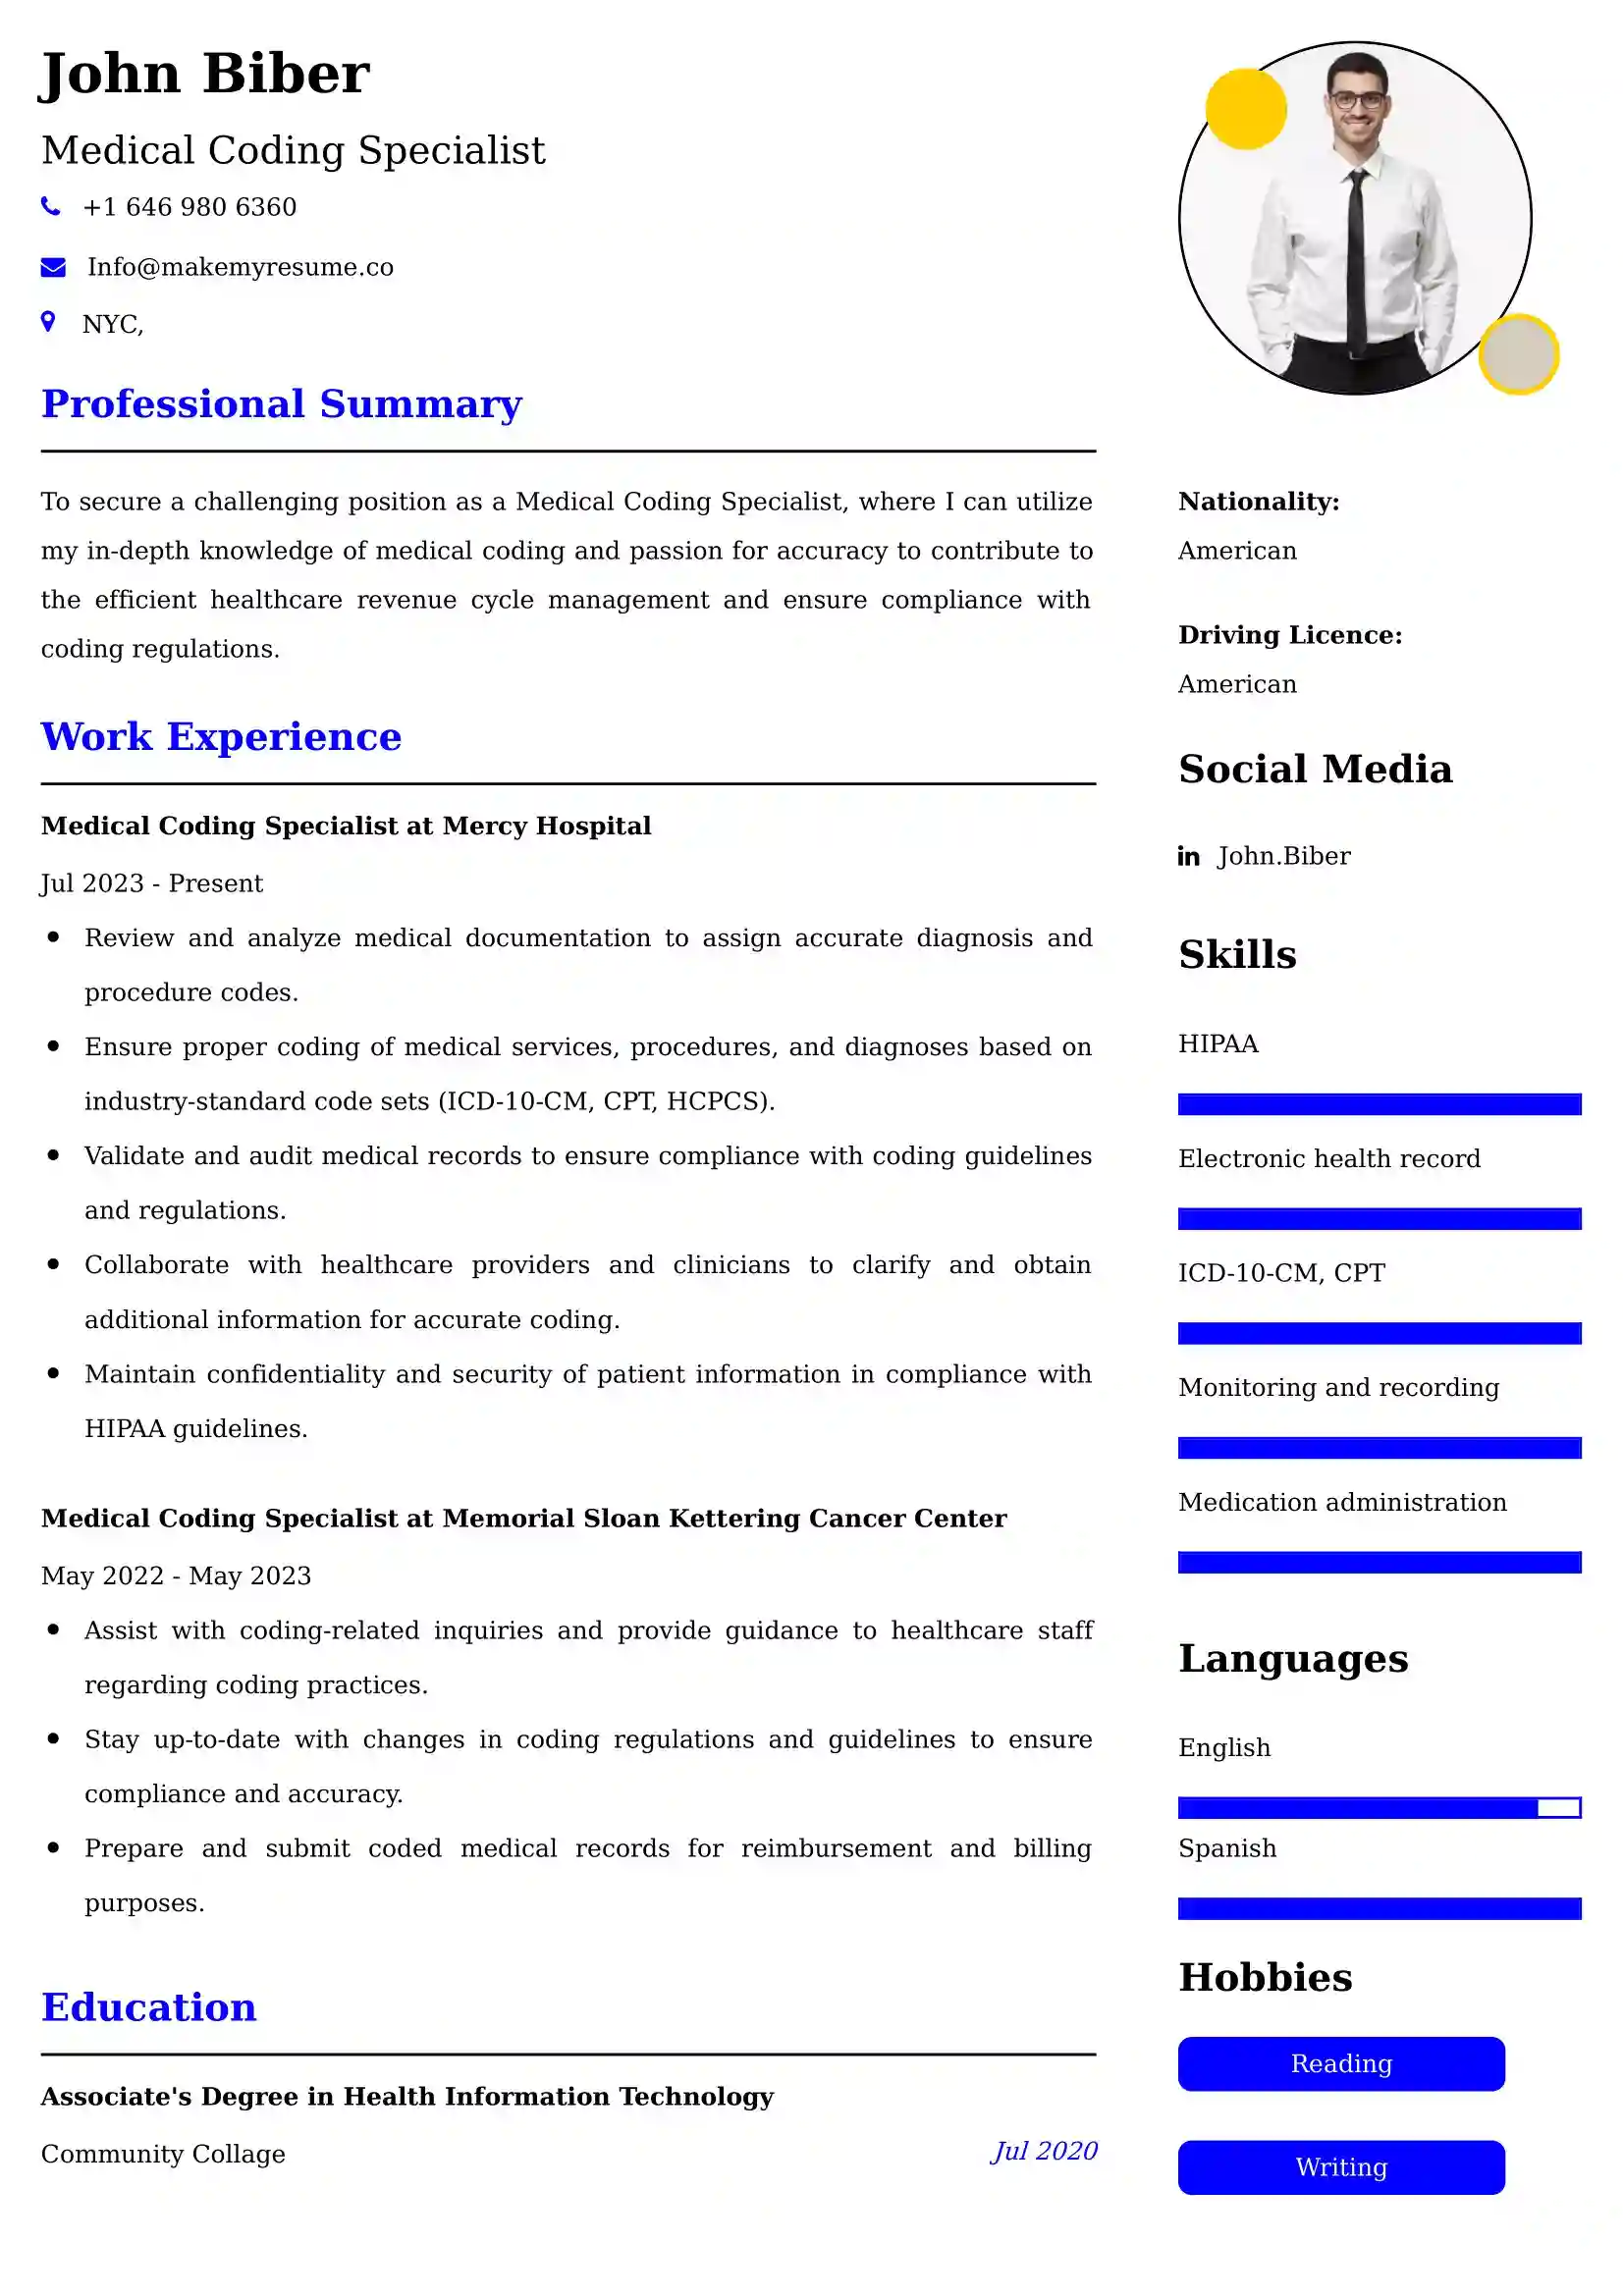 Medical Coding Specialist Resume Examples - Brazilian Format, Latest Template